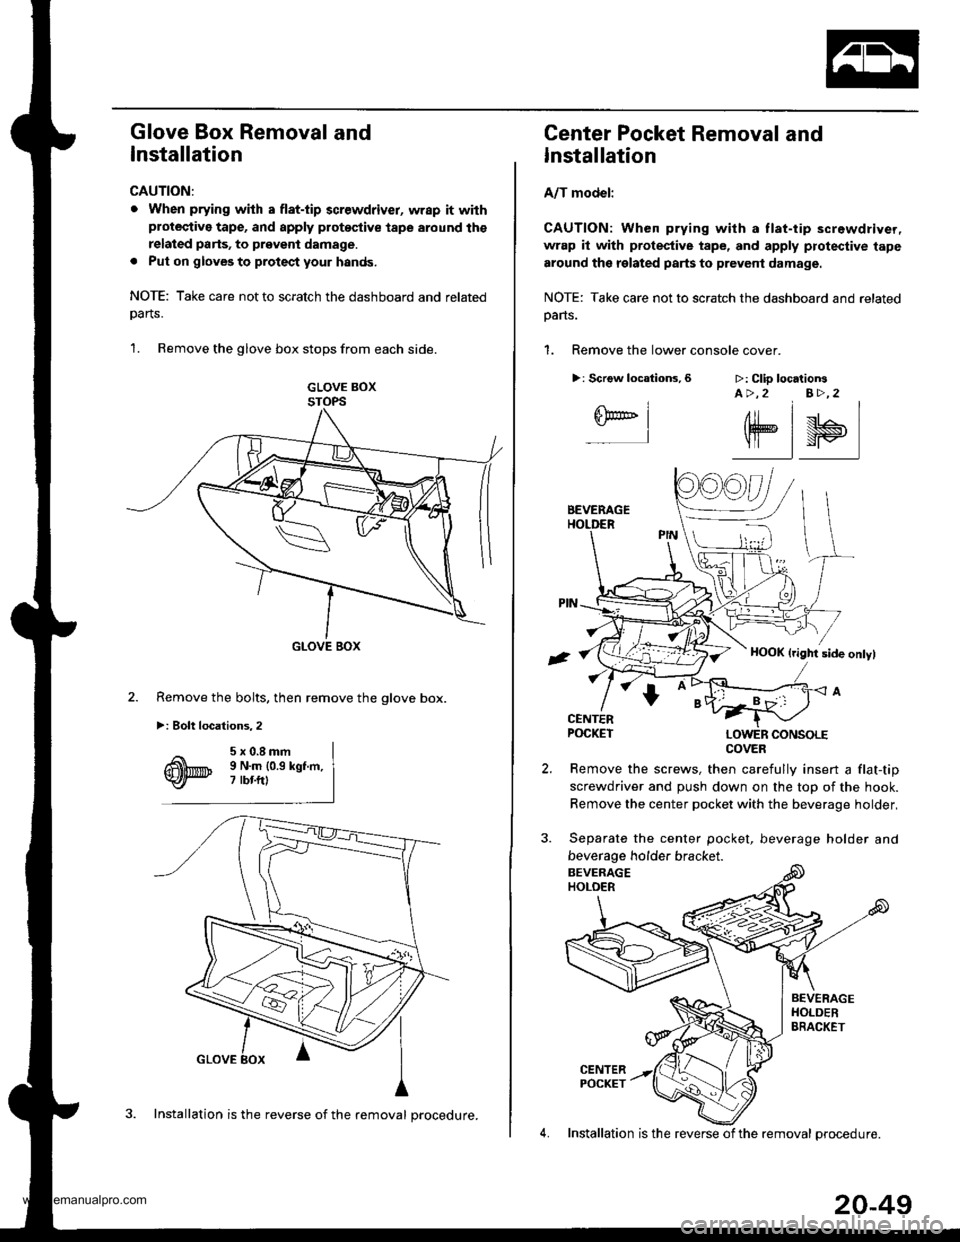 HONDA CR-V 1998 RD1-RD3 / 1.G User Guide 
Glove Box Removal and
Installation
CAUTION:
. When prying with a flat-tip 3crewdriver, wrap it withprotective tape, and apply protoqtive tape around ths
related parts, to prgveni damage.
. Put on glo